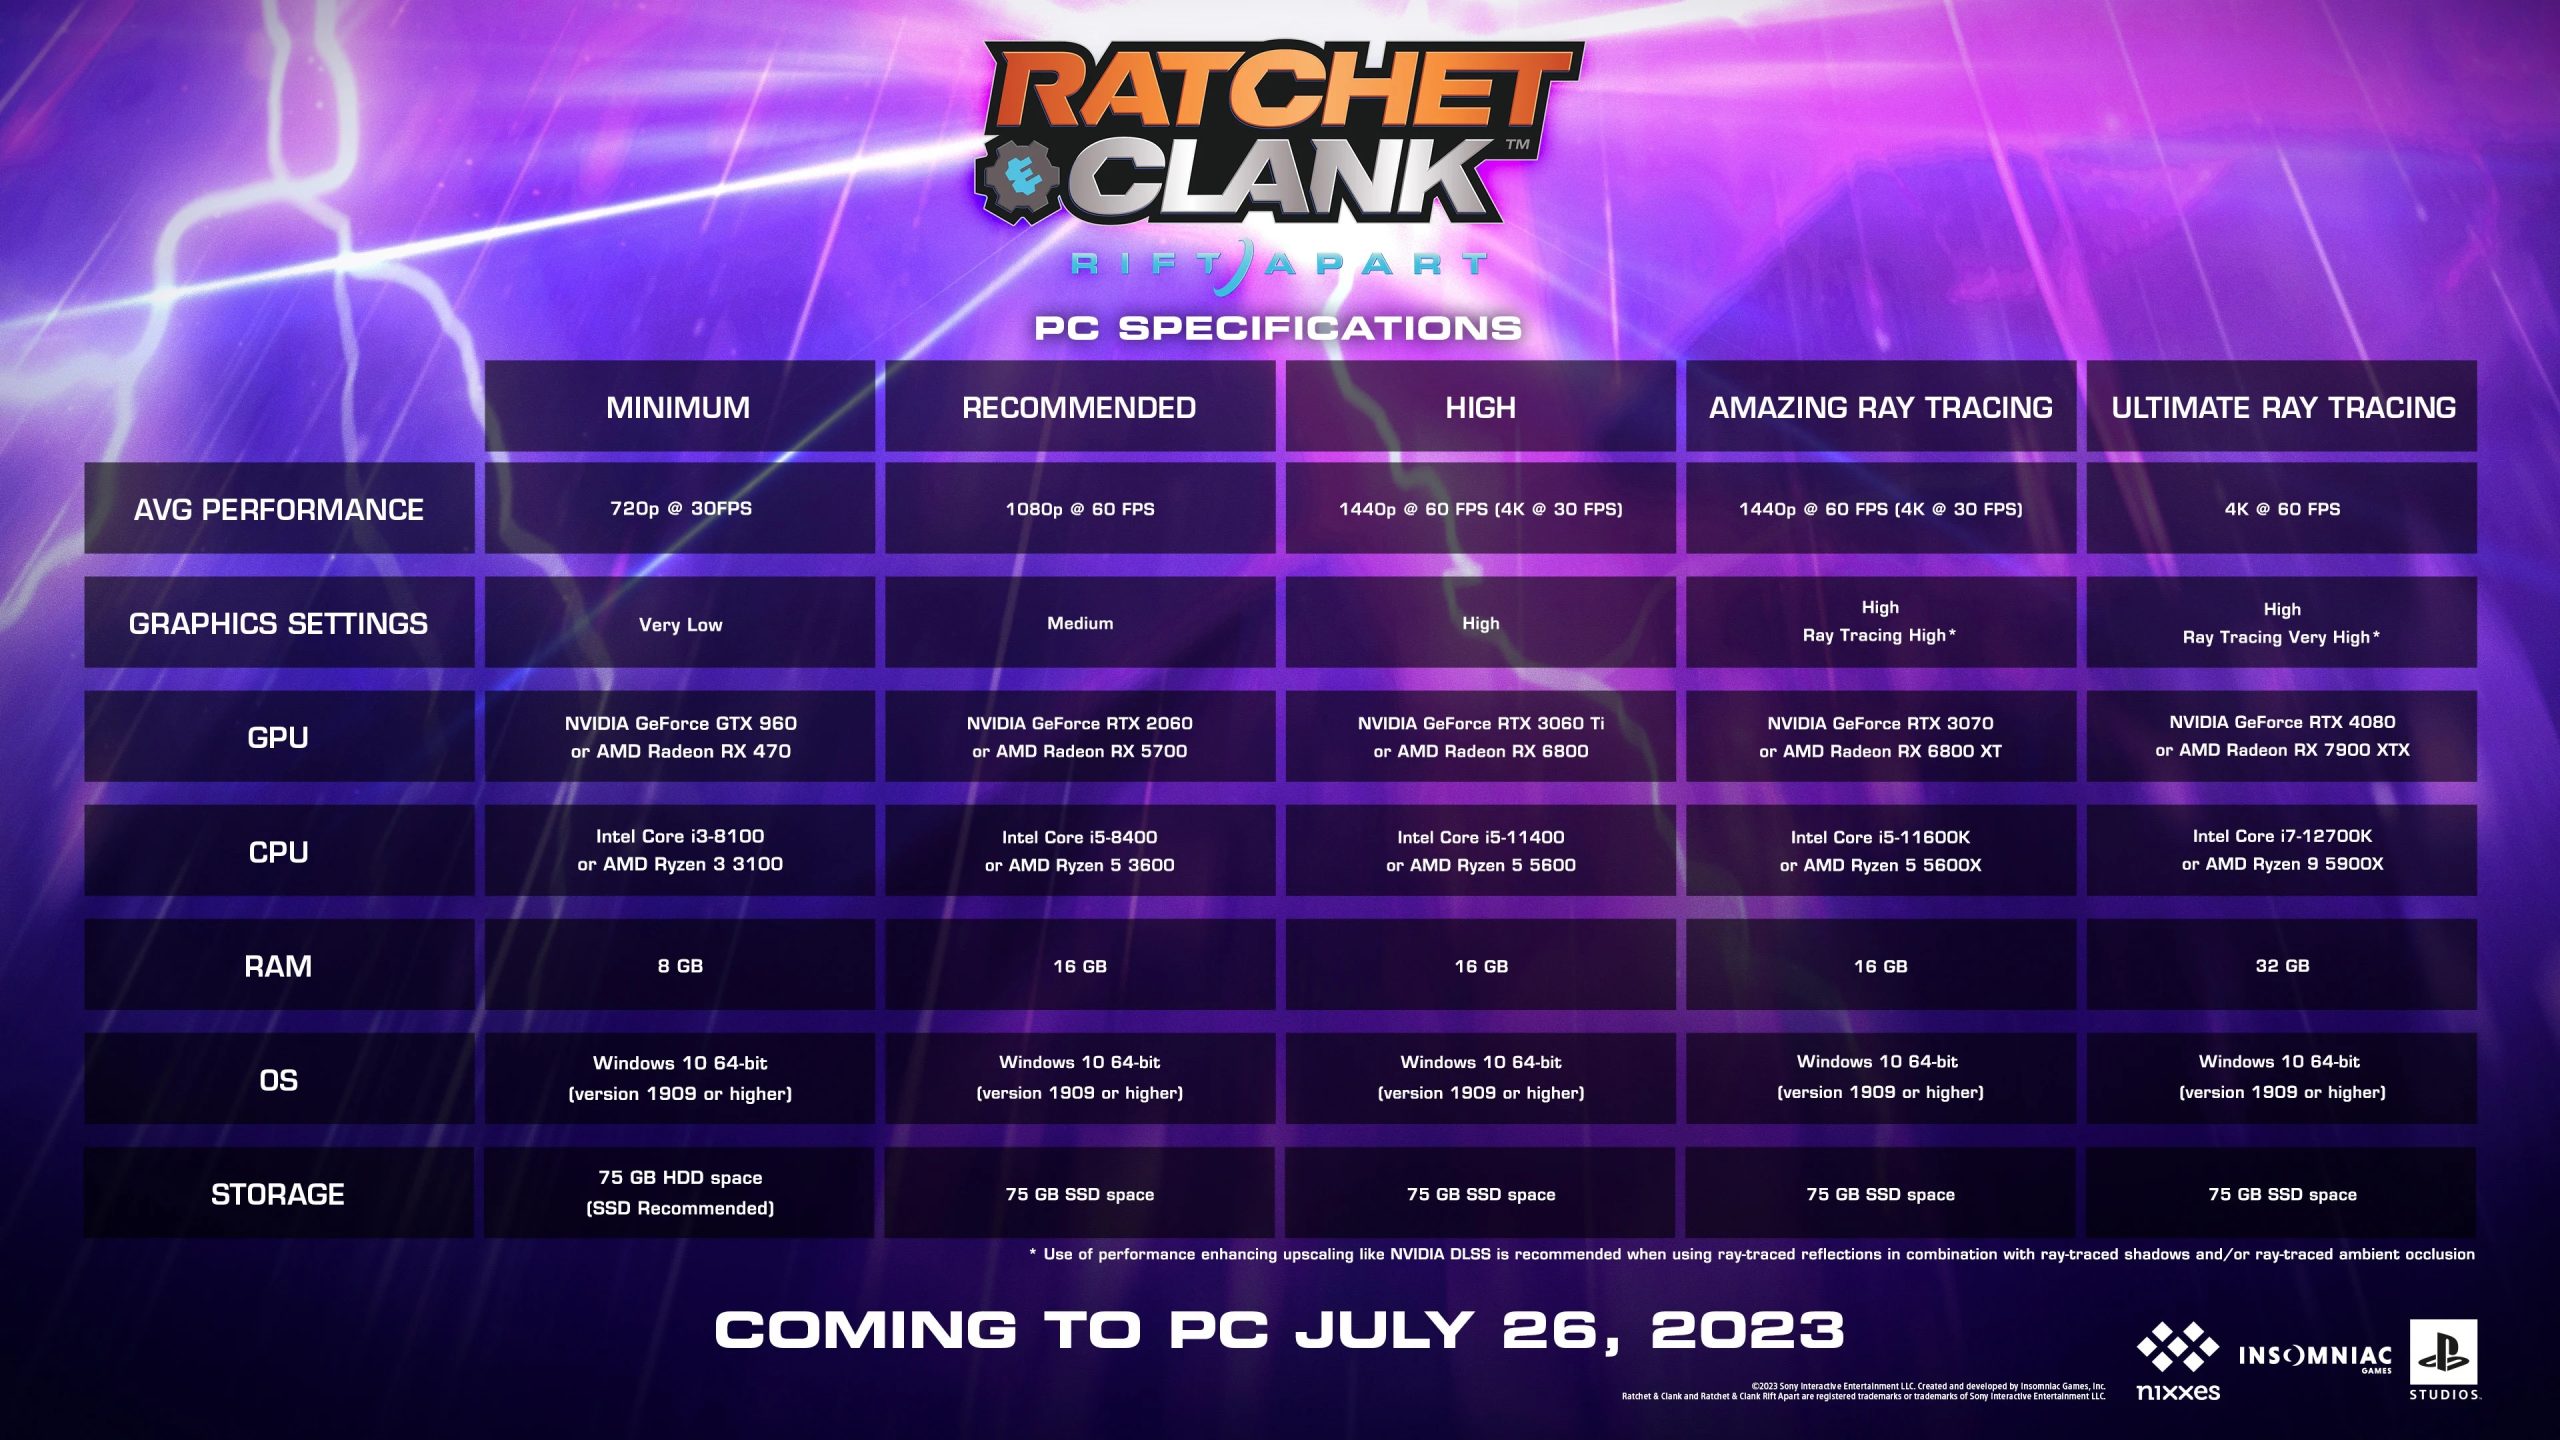 Ratchet & Clank requisitos SSD